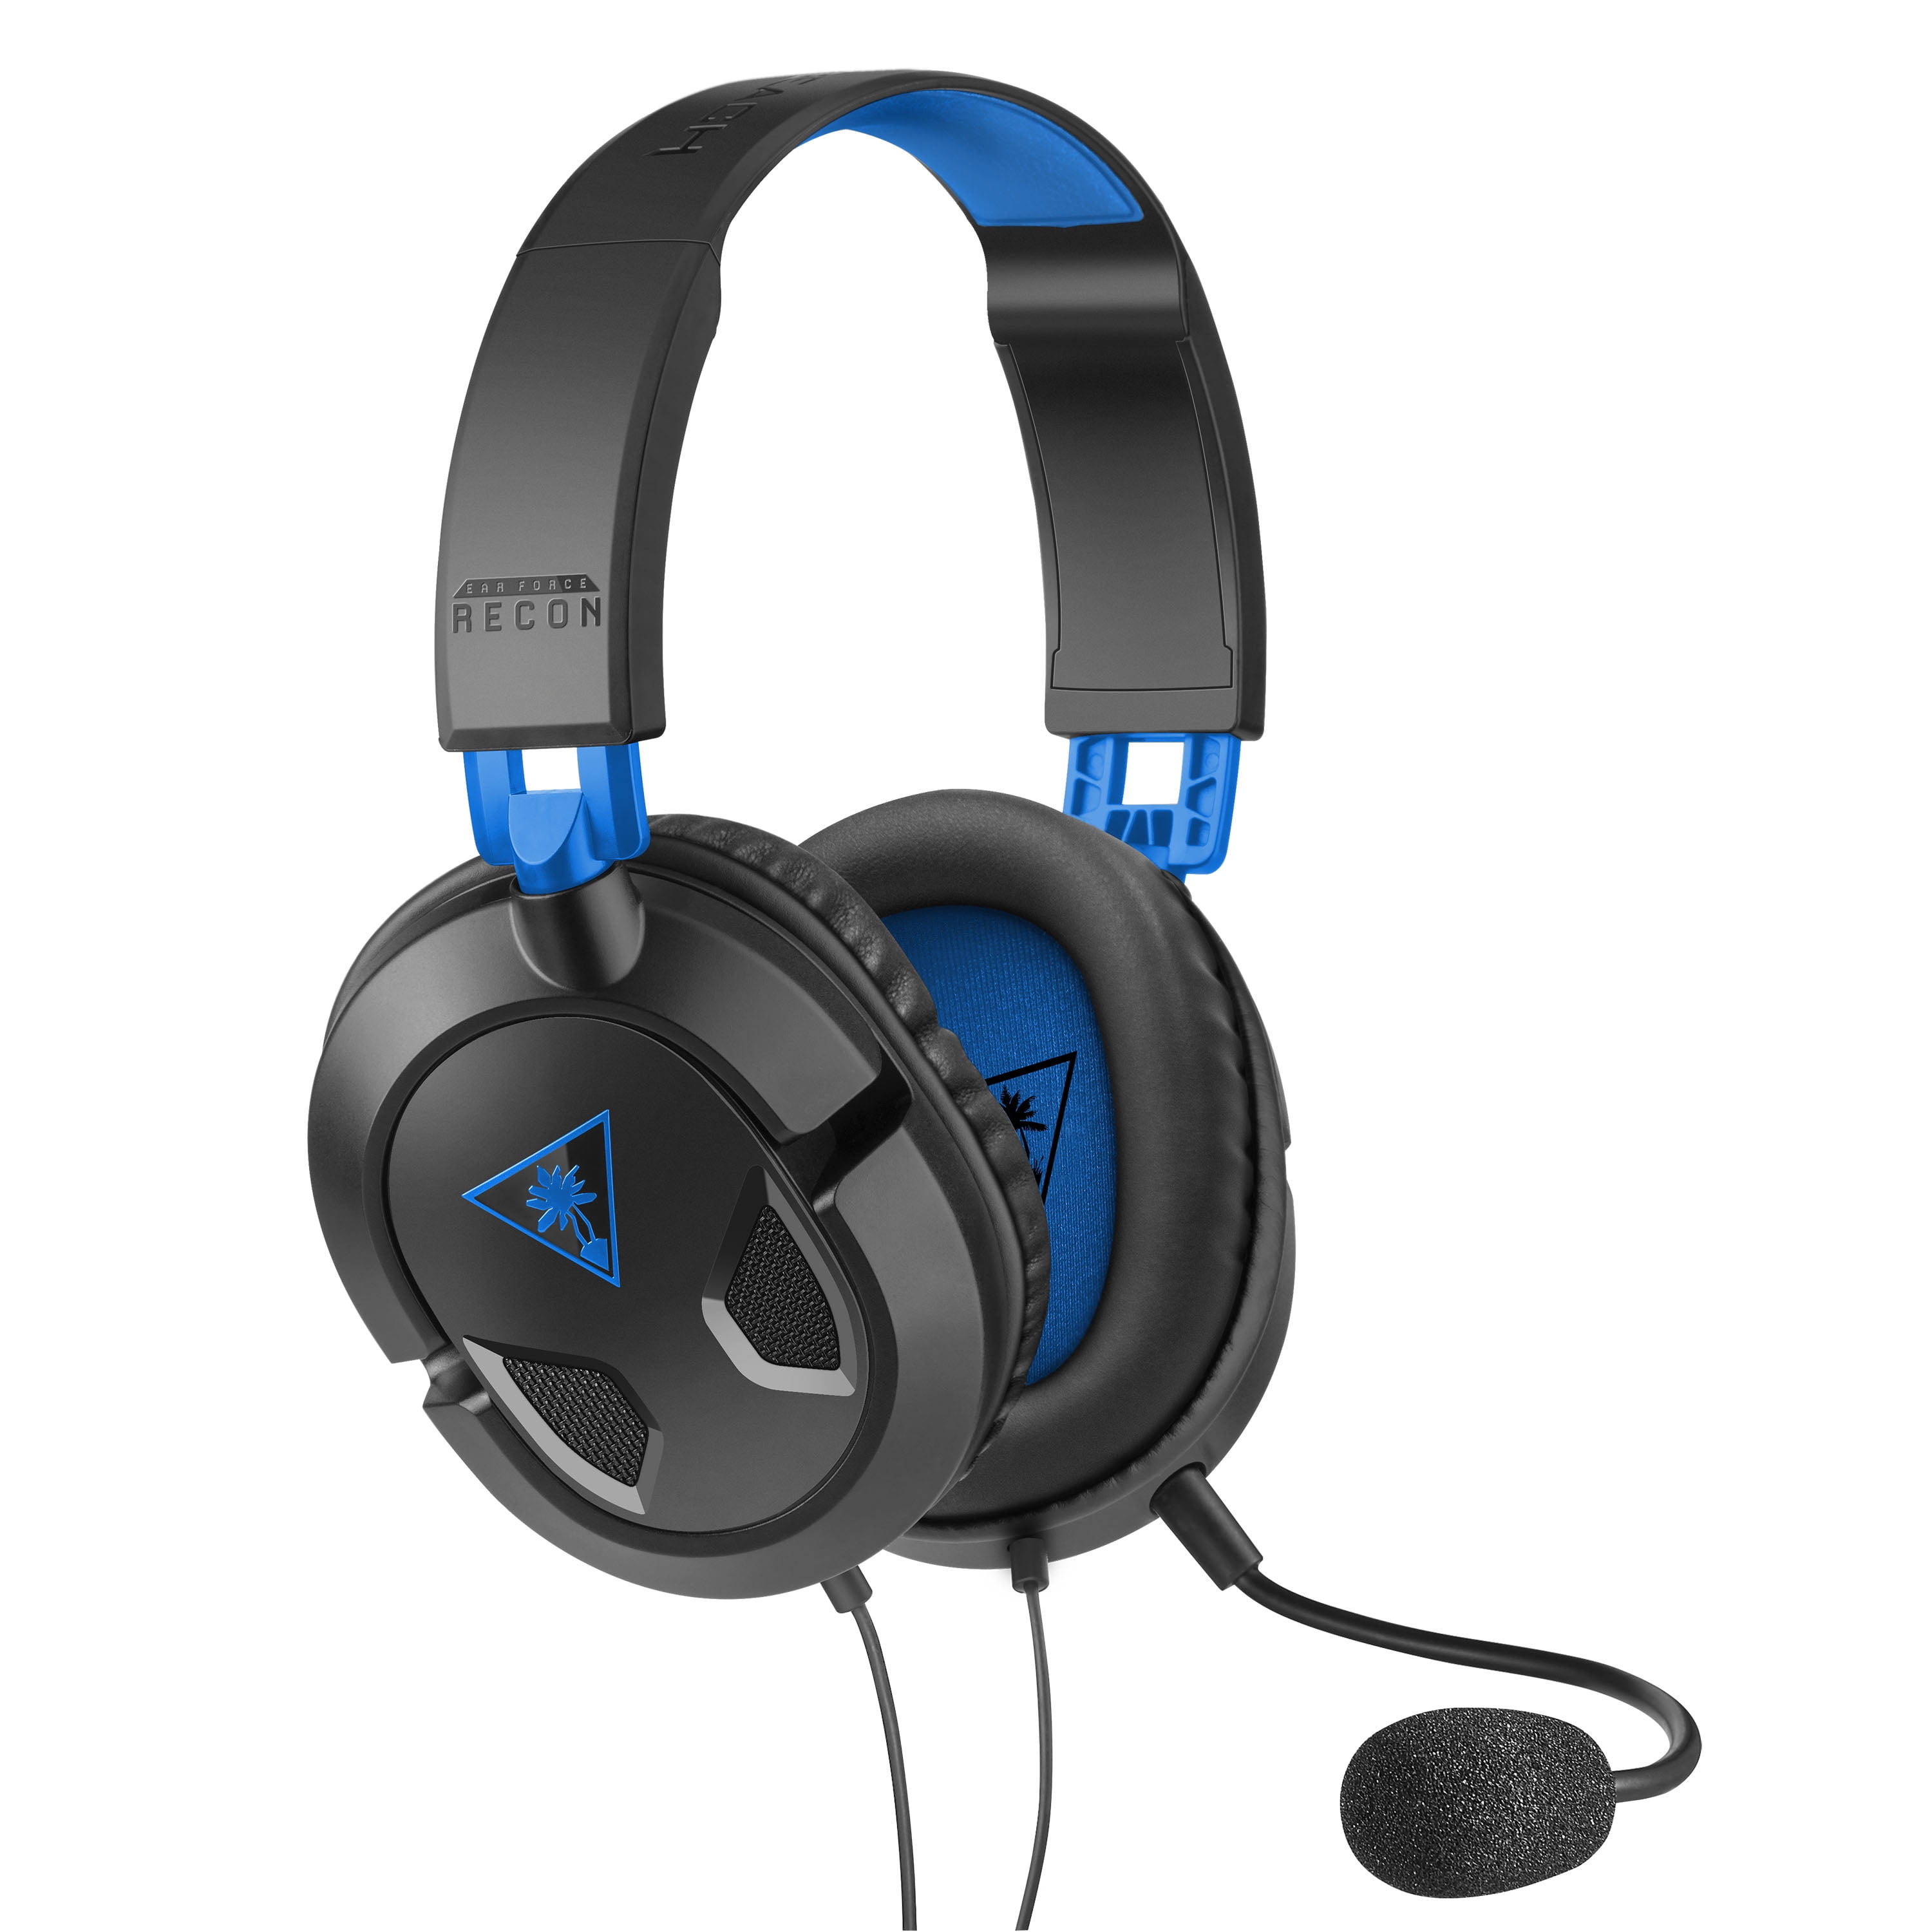 Moment Herenhuis Astrolabium Turtle Beach Recon 50 PlayStation Gaming Headset for PS5, PS4, PlayStation,  Xbox Series X, Xbox Series S, Xbox One, Nintendo Switch, Mobile & PC with  3.5mm - Removable Mic, 40mm Speakers -